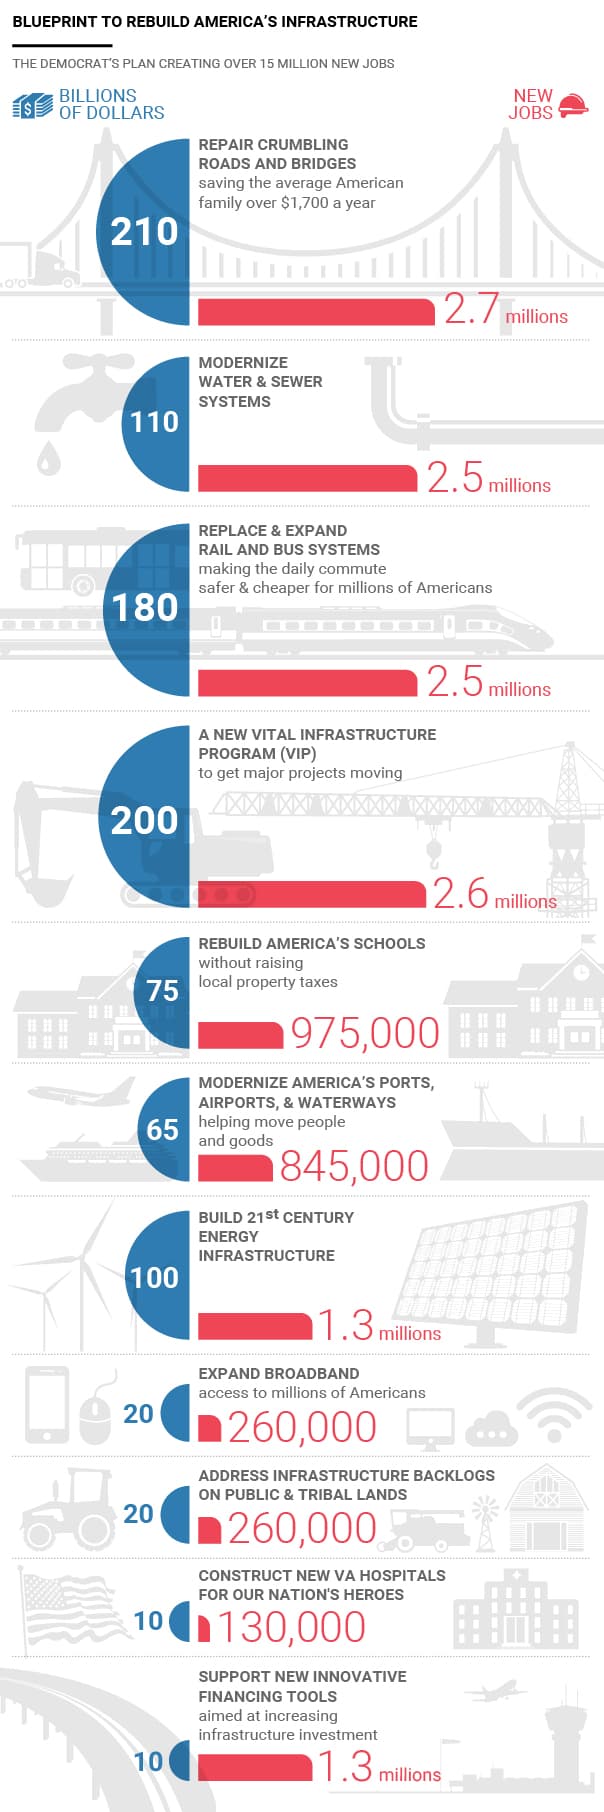 A Blueprint to Rebuild America's infrastructure: the infographics